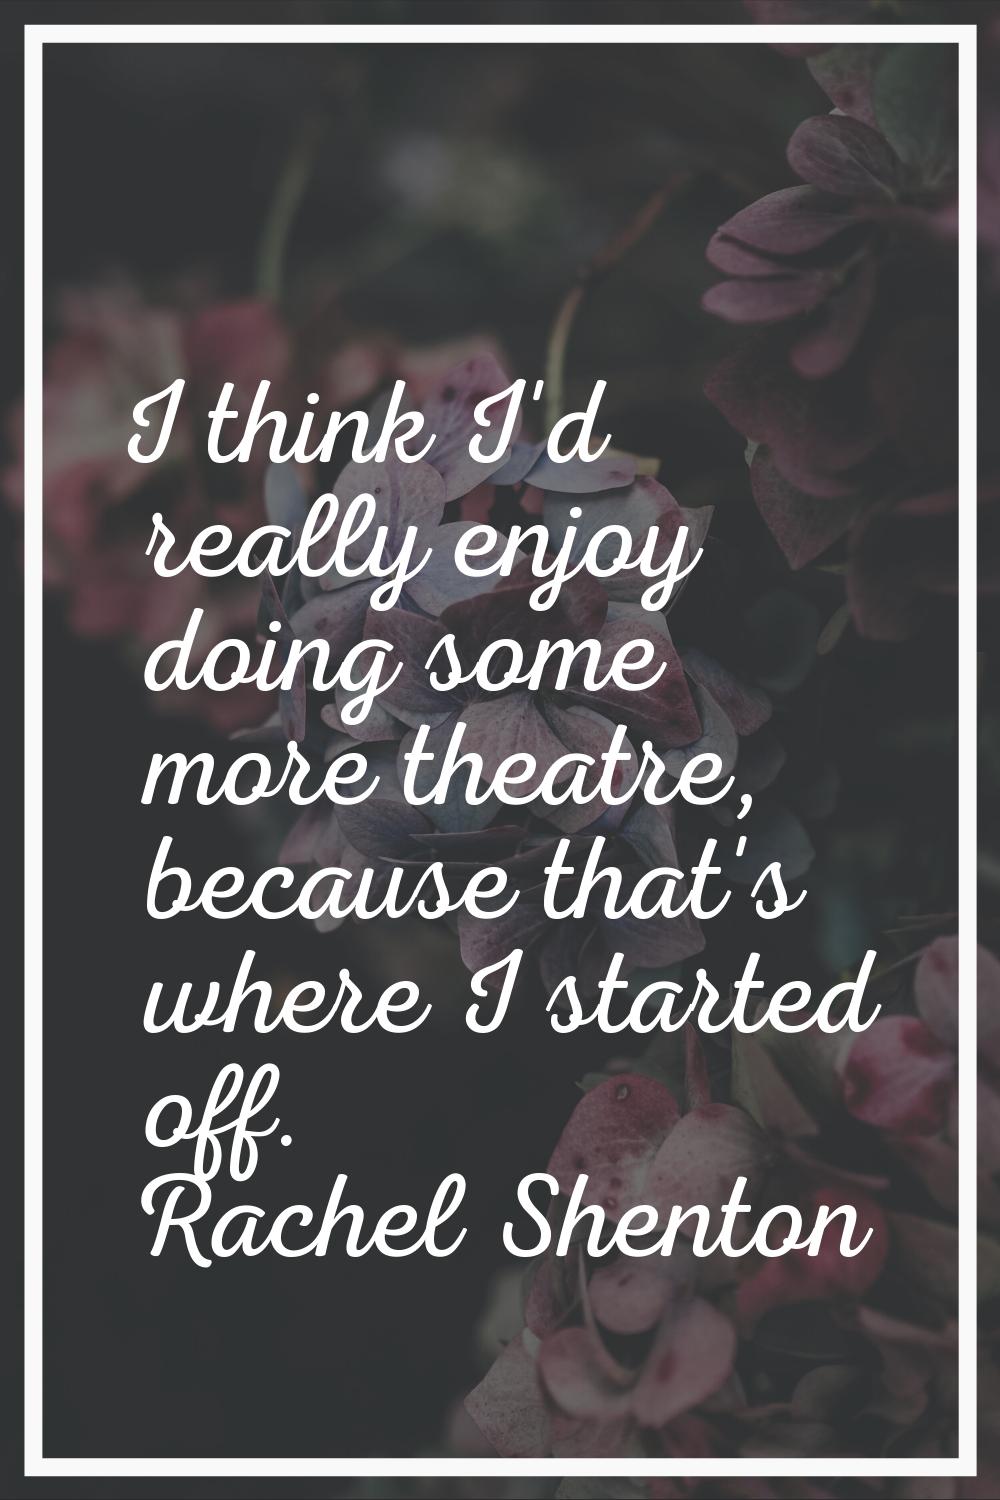 I think I'd really enjoy doing some more theatre, because that's where I started off.